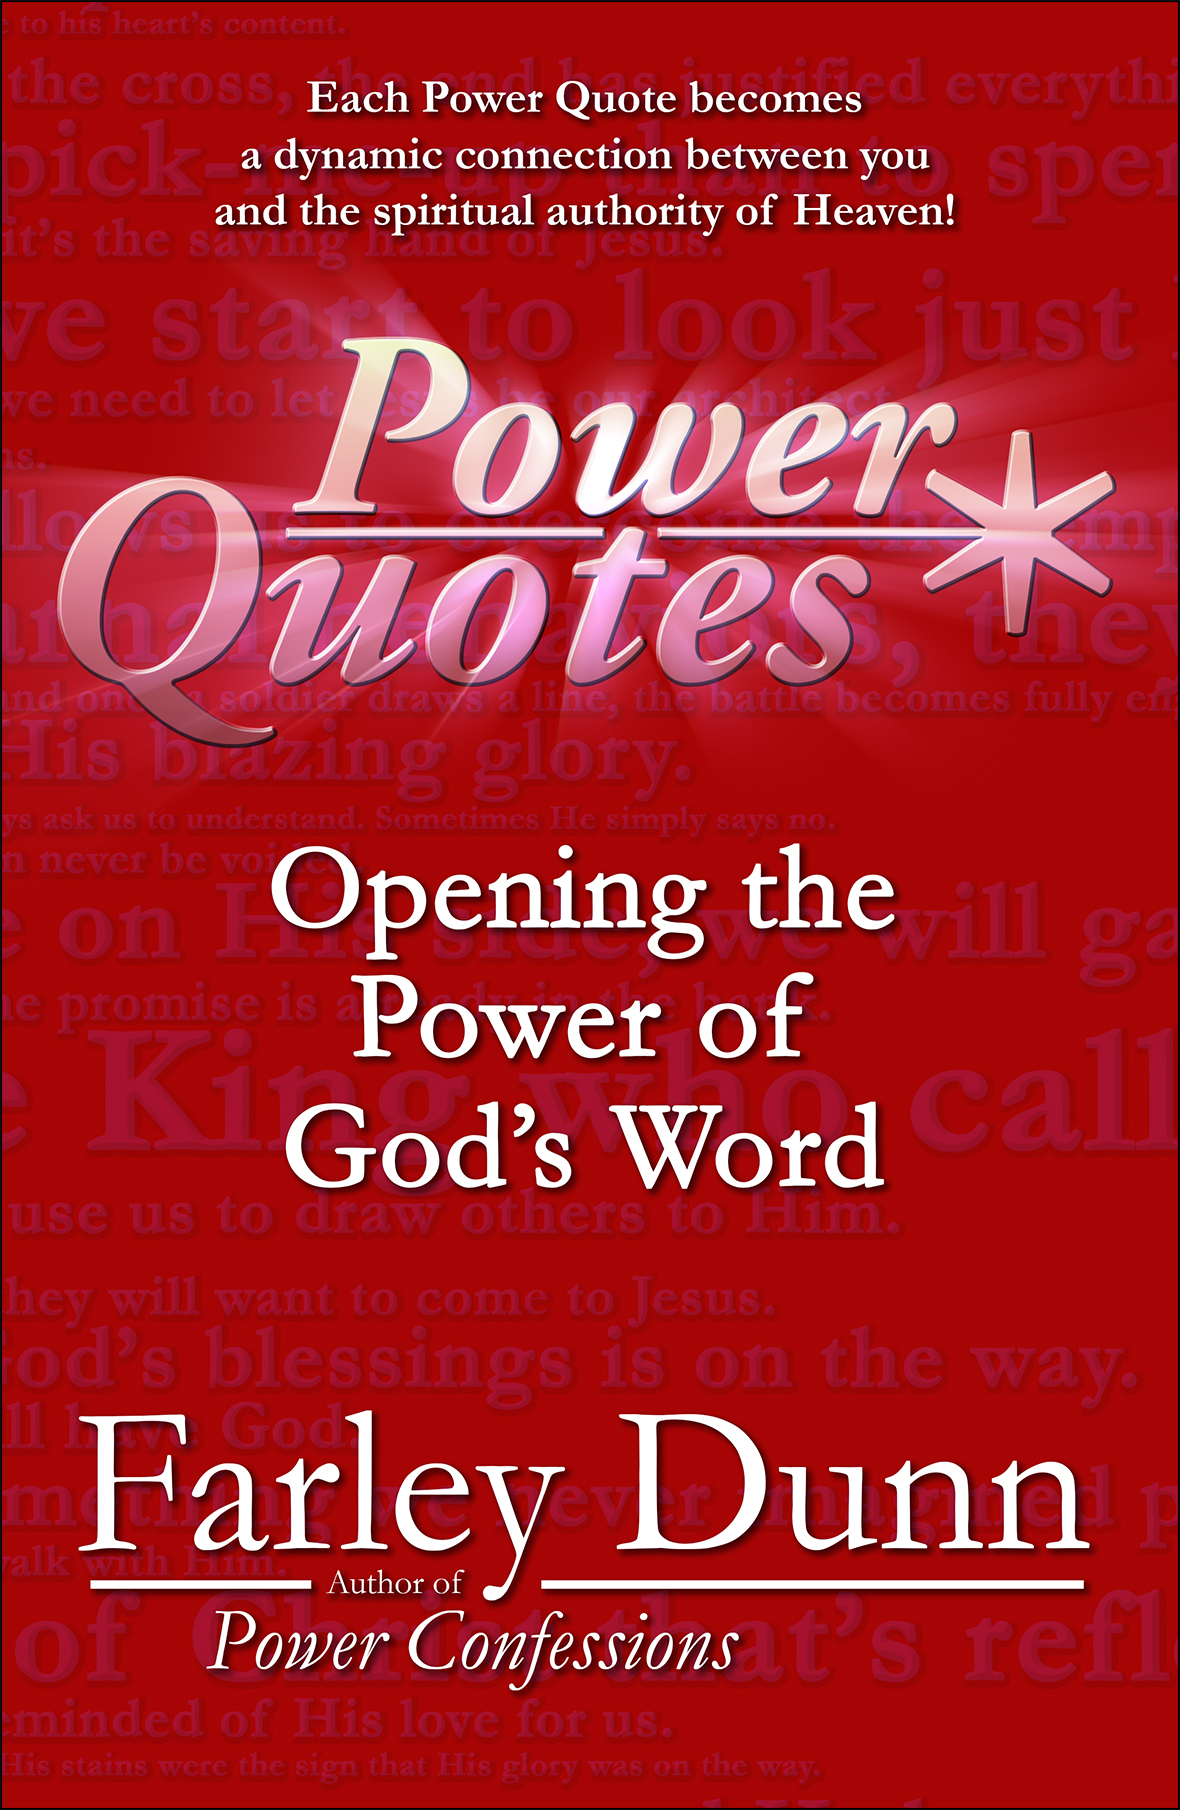 Power Quotes V1 Full Cover Book 4 reduced for Web Insertion